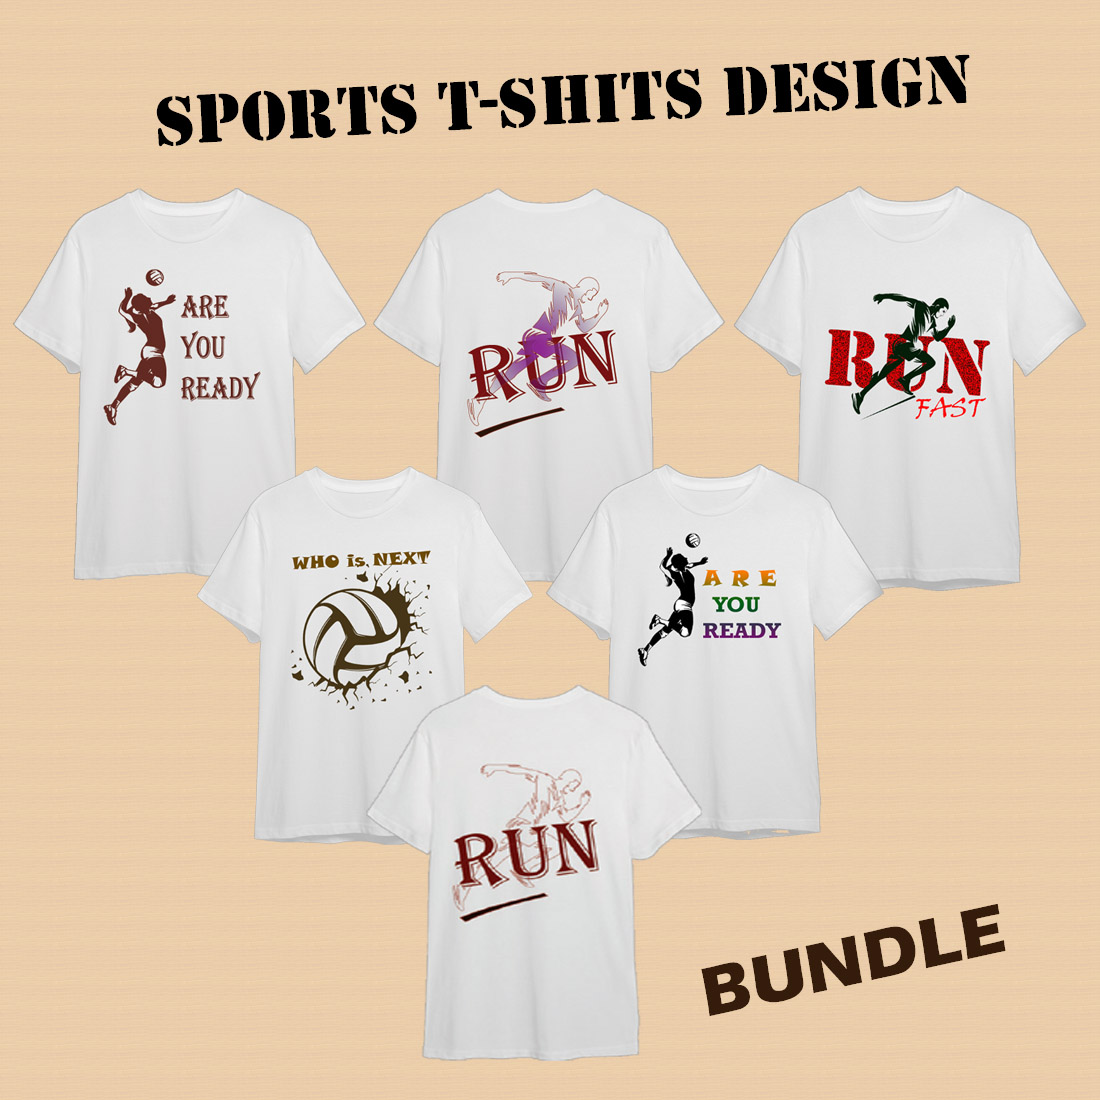 Sports T-Shirt Designs High Res 2023 cover image.